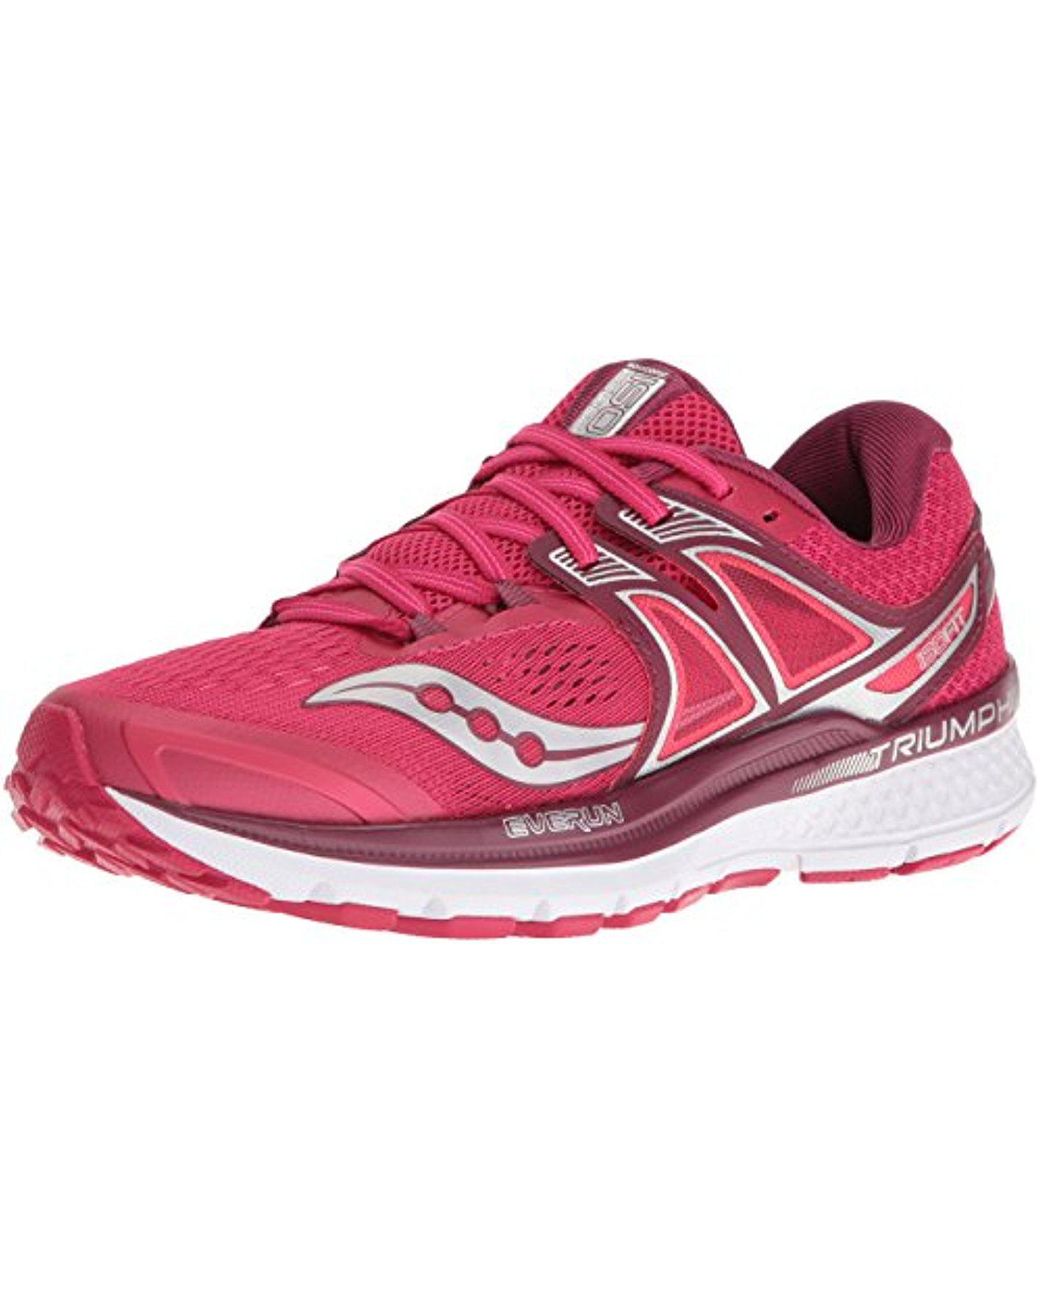 Saucony Synthetic Triumph Iso 3 Running Sneaker in Pink/Berry/Silver ...